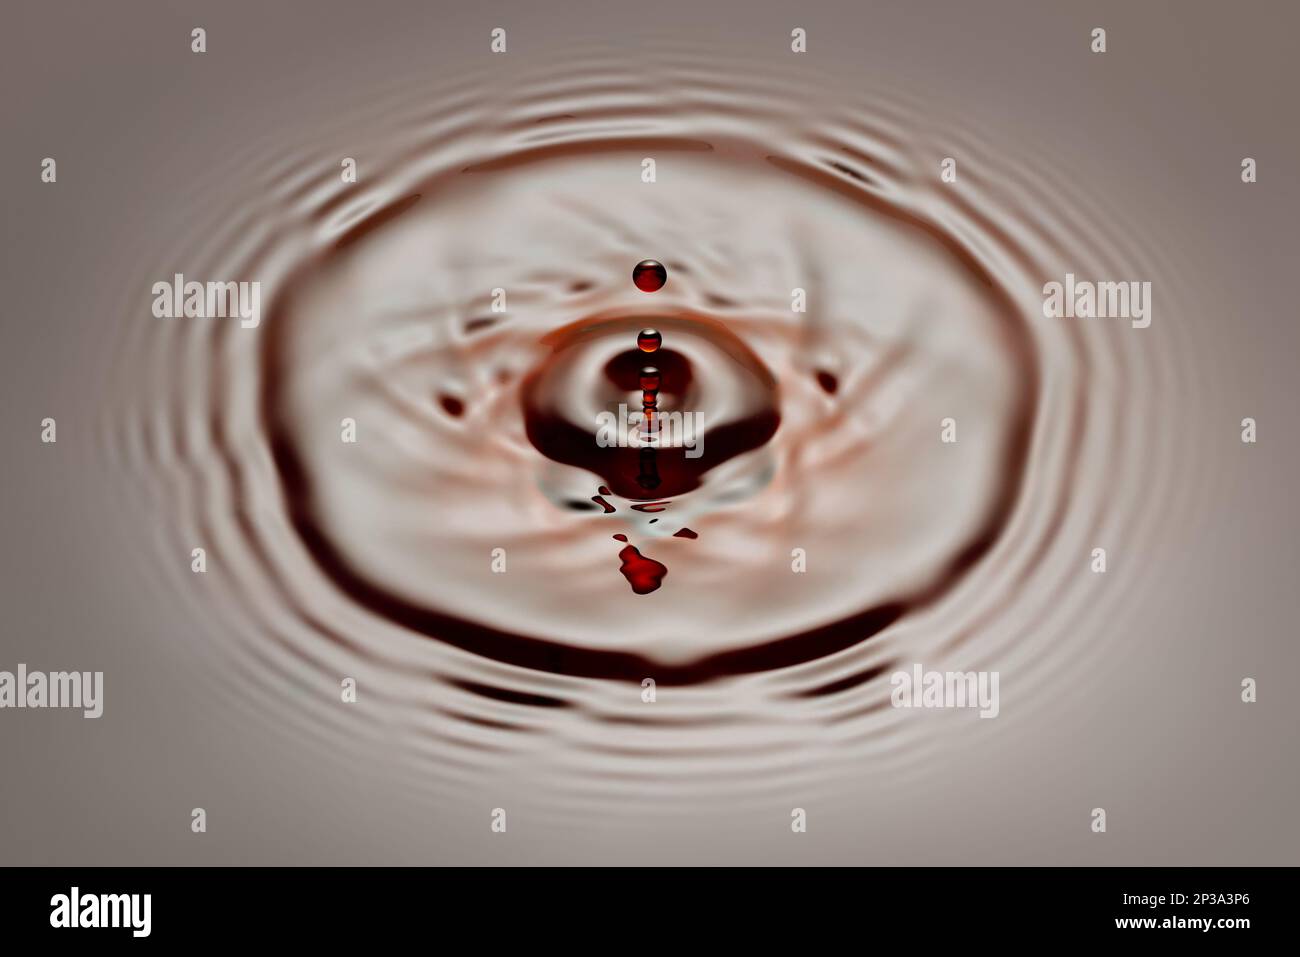 drop falling on soy sauce or brown liquid and created splash Stock Photo